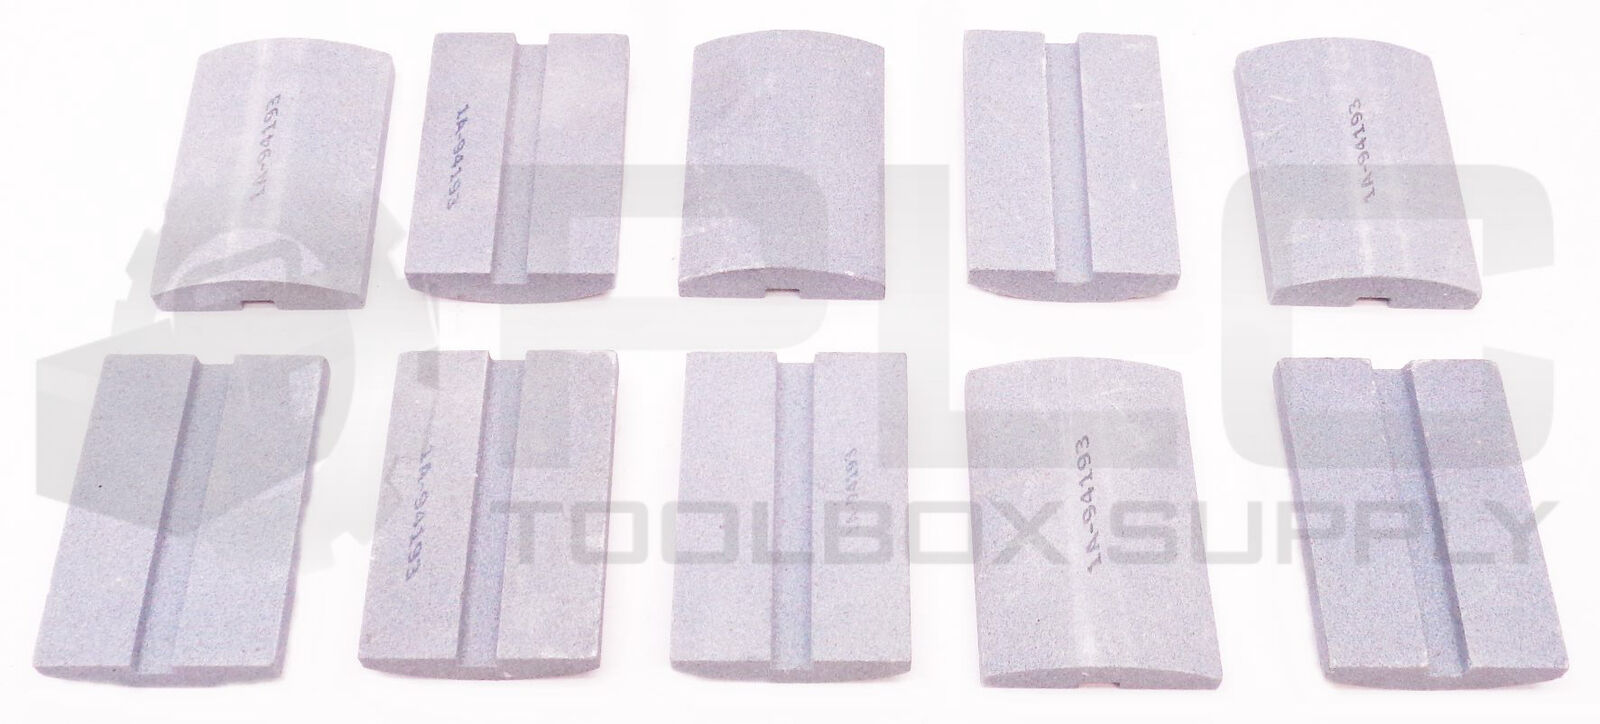 LOT OF 10 NEW 1A-94193 DIAMOND POCKET SHARPENING STONE 3 X 2 *QTY AVAILABLE*